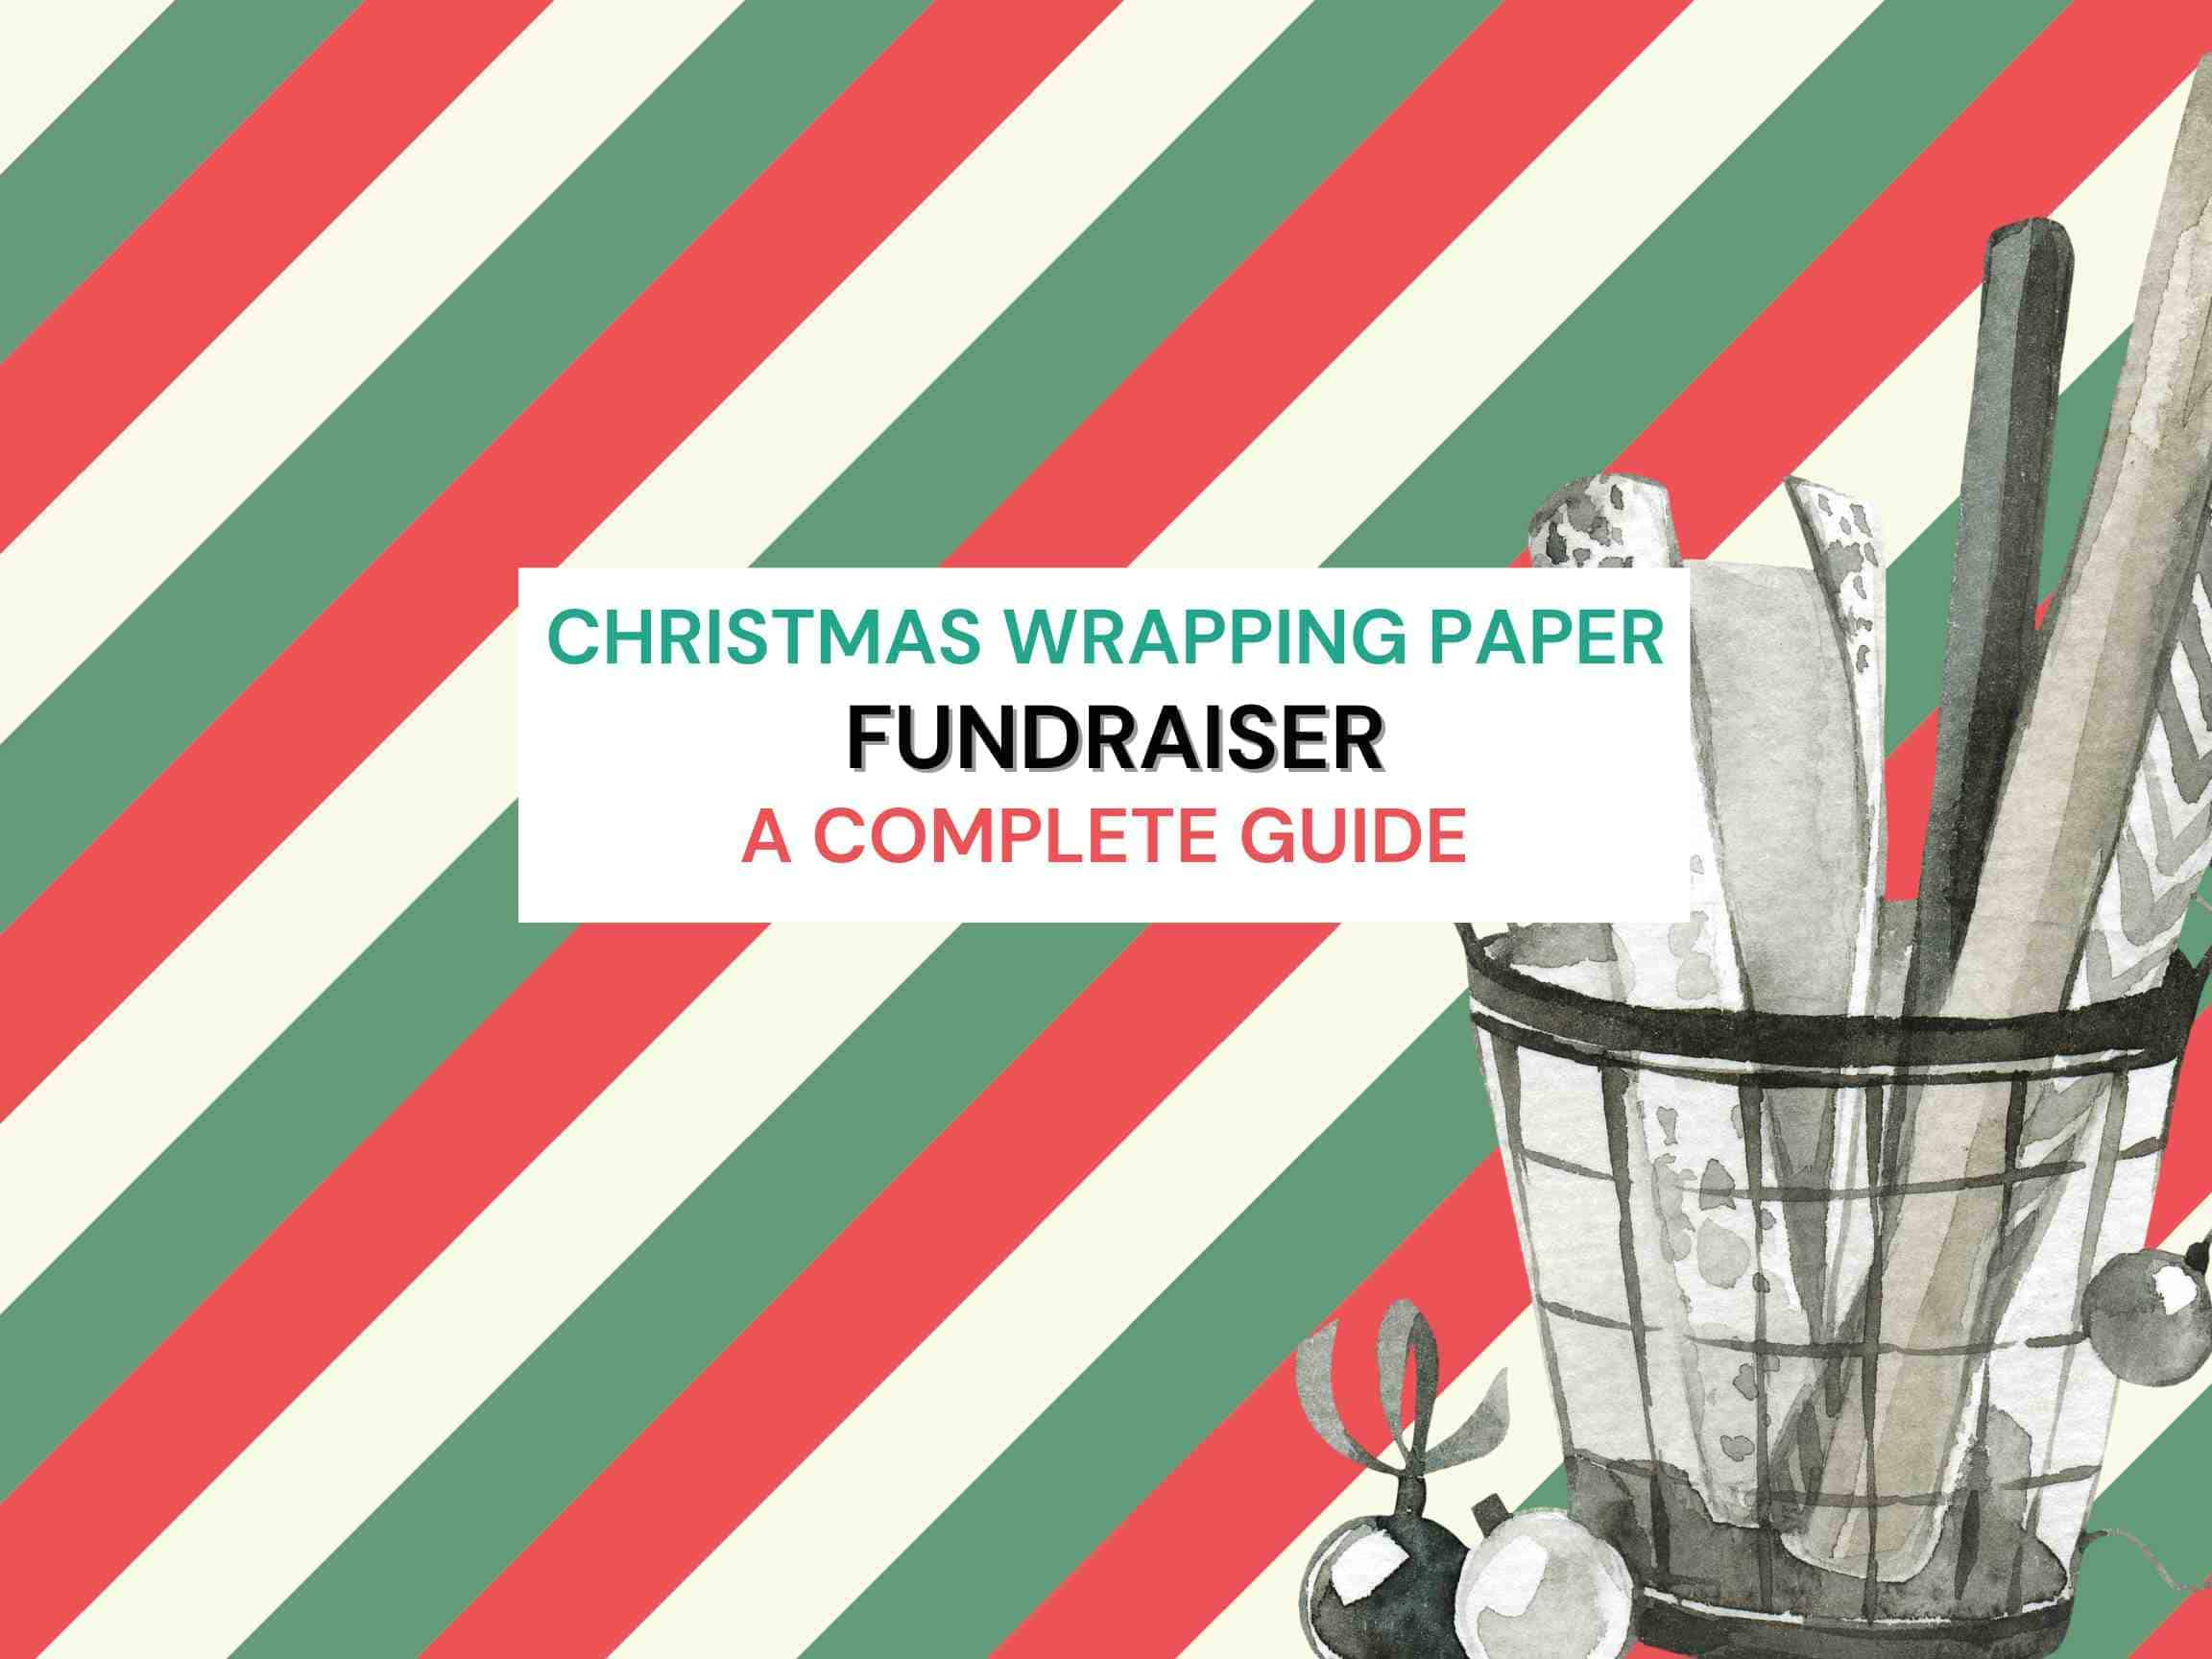 Christmas Wrapping Paper Fundraiser Guide